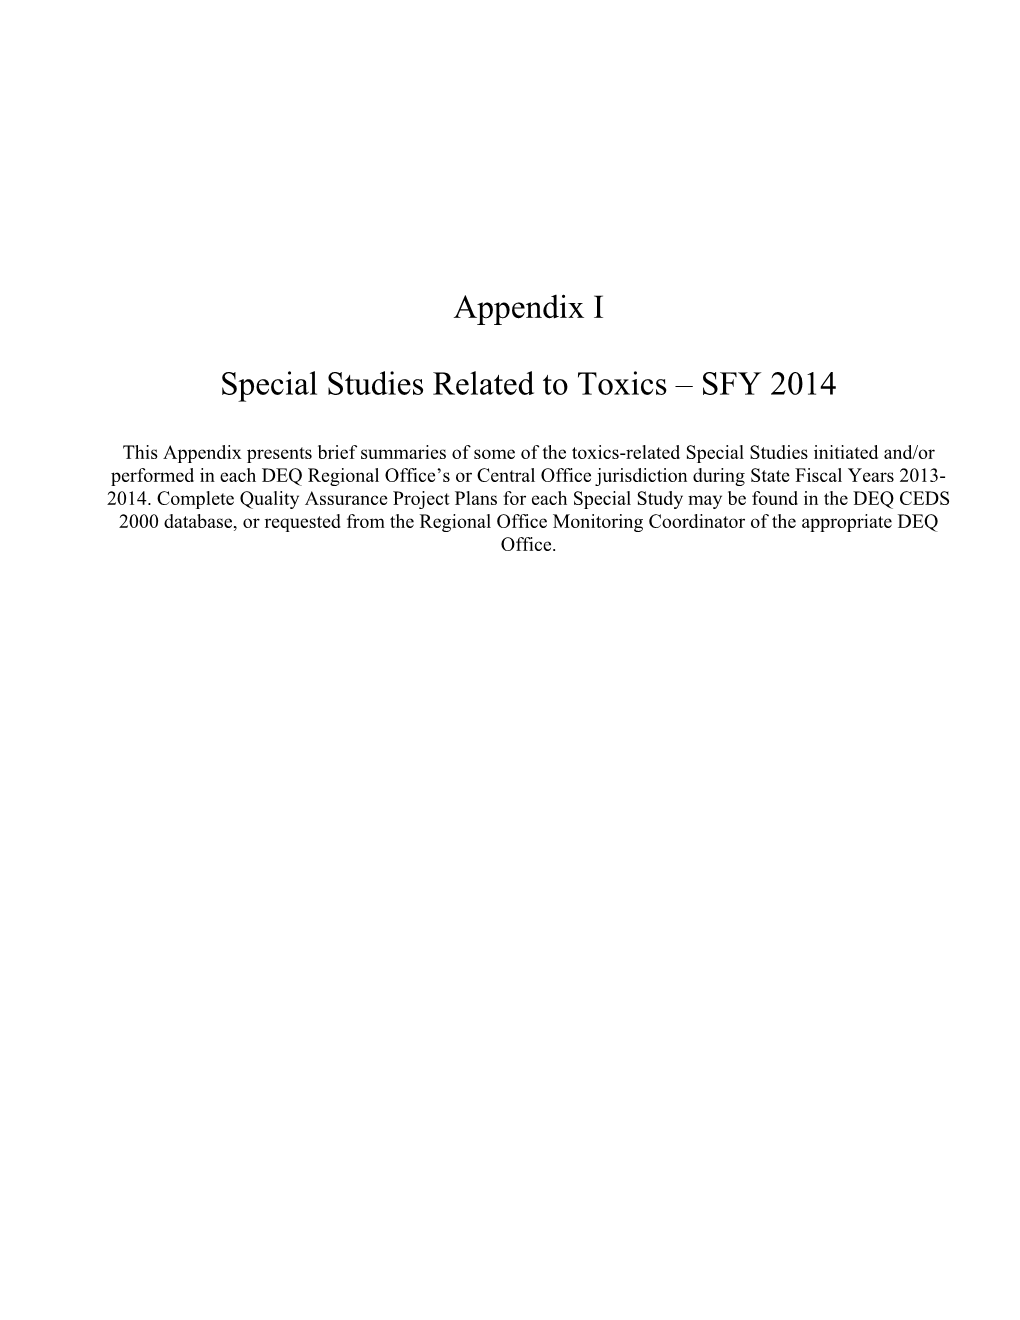 Toxics-Related Special Studies - 2003